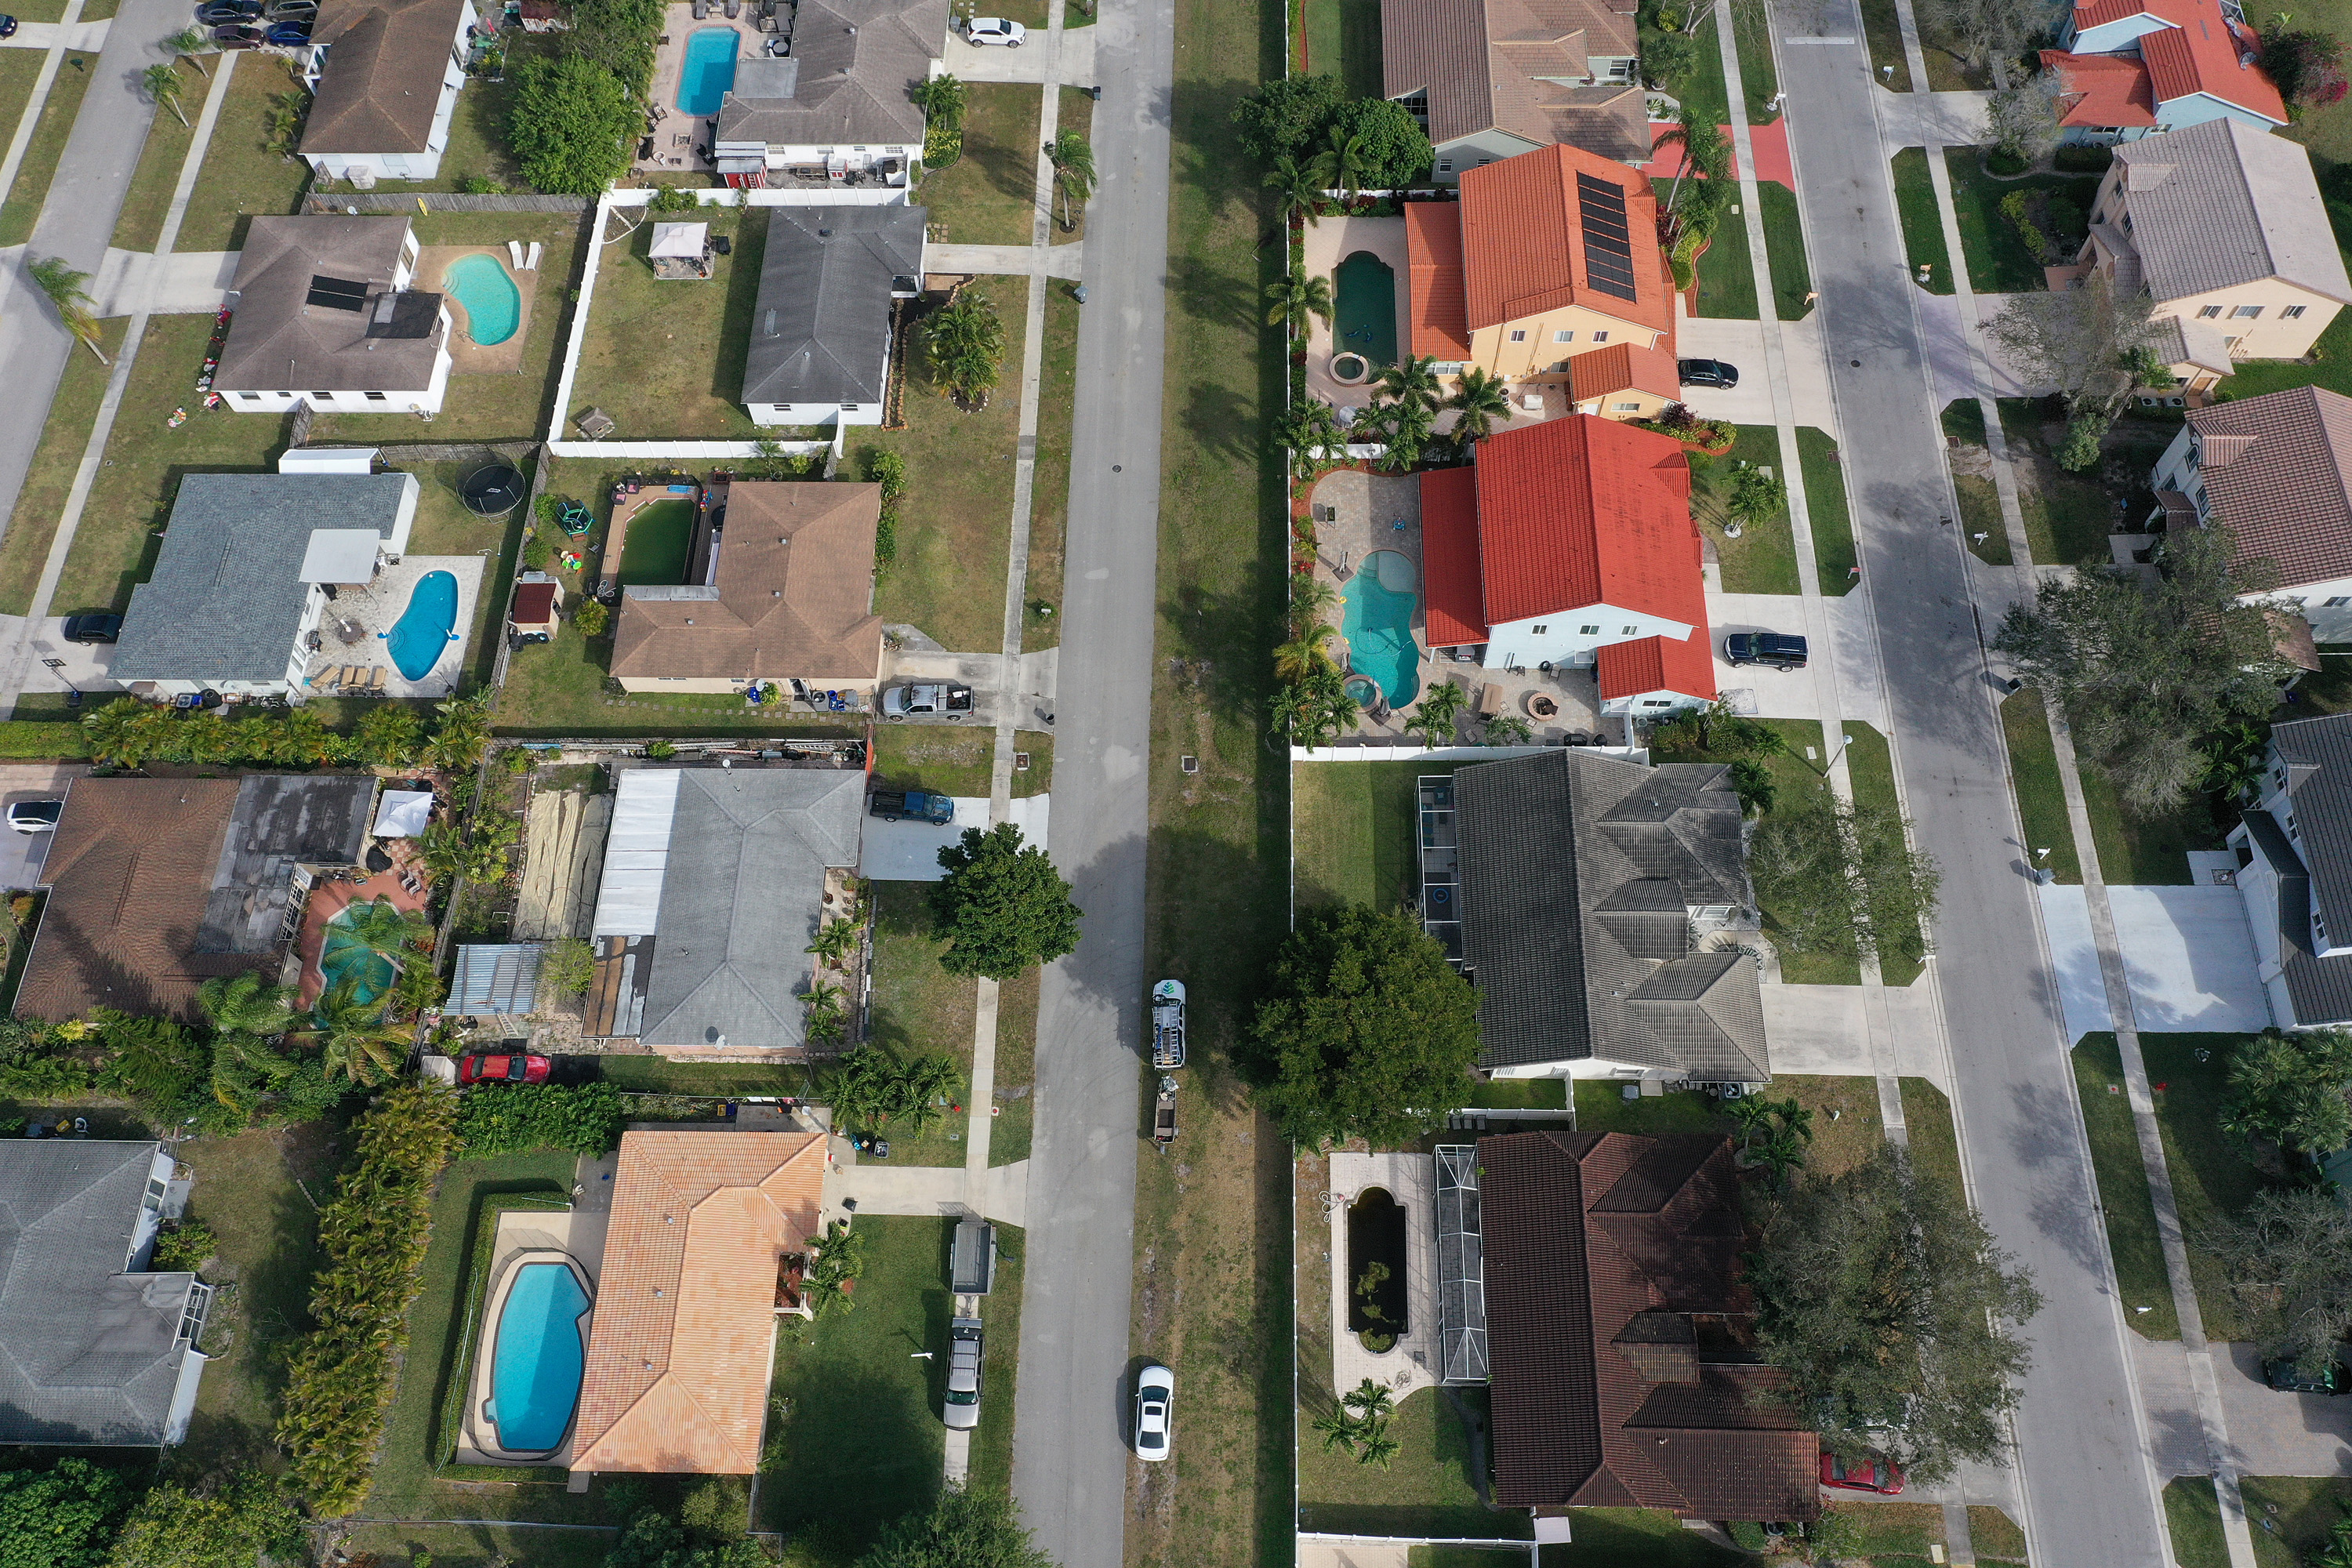 Real estate market value in Florida could fall under new law